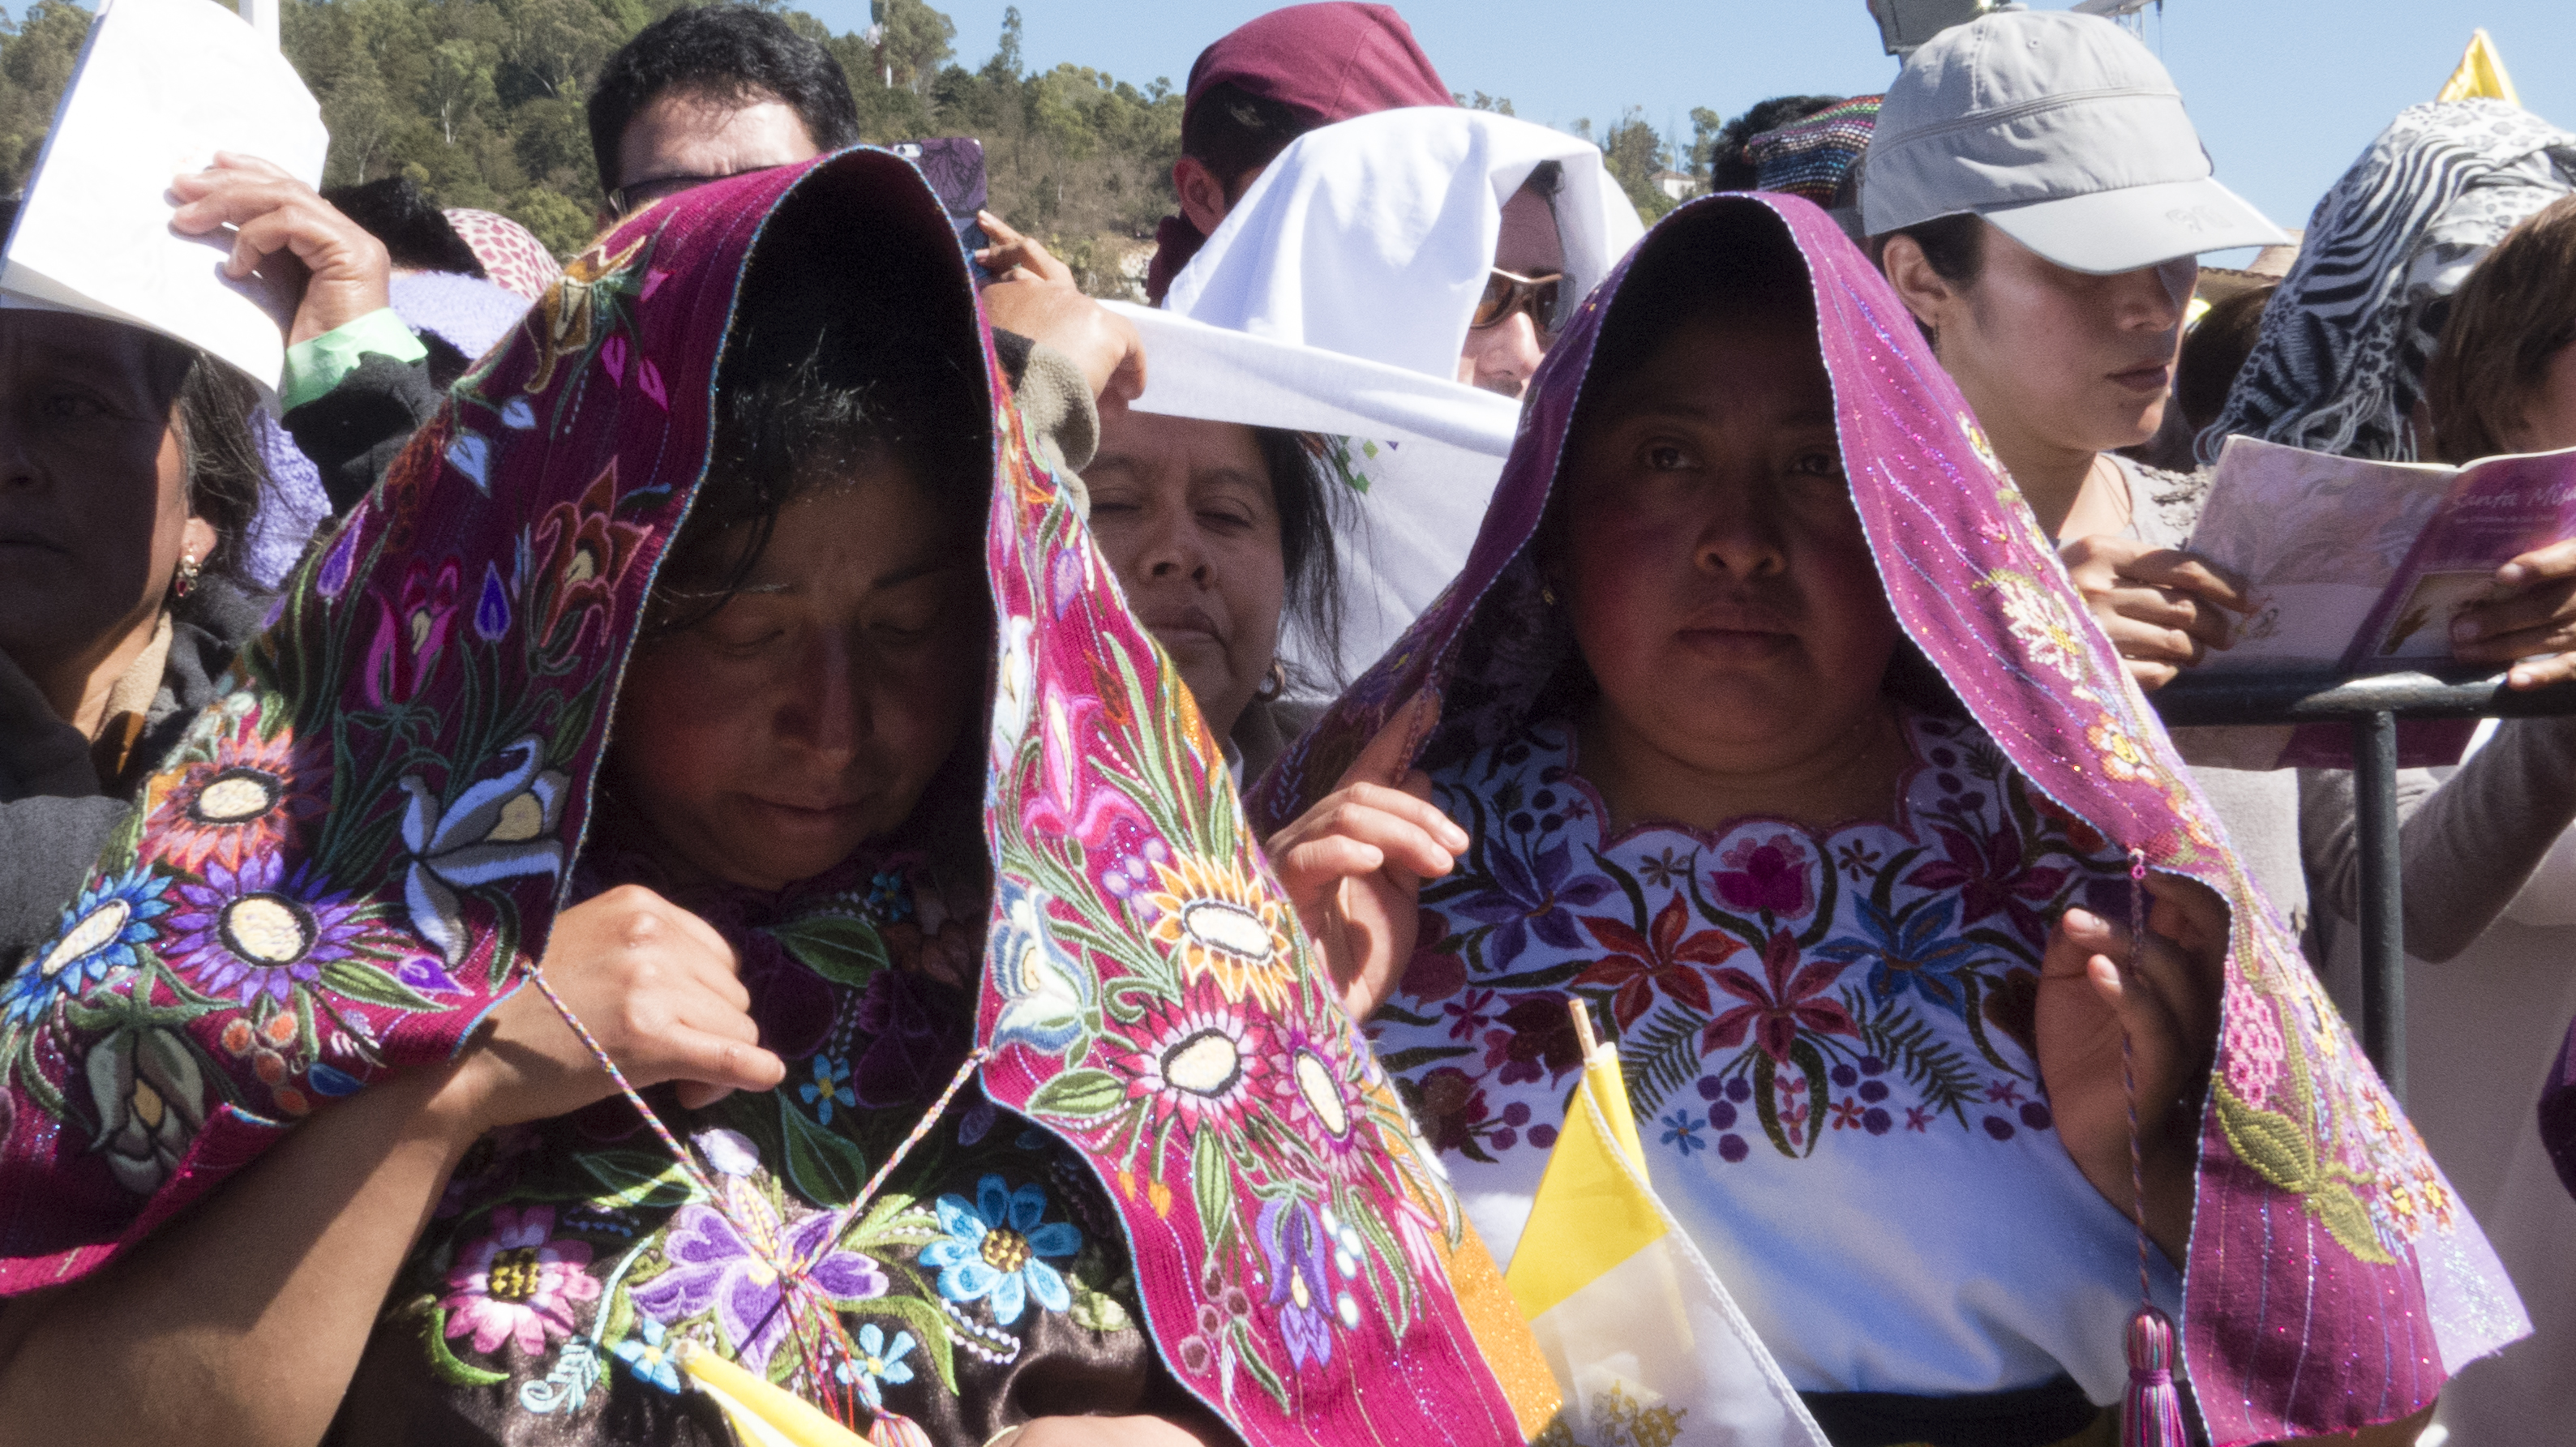 The Pope’s Encounter with Indigenous Mexico